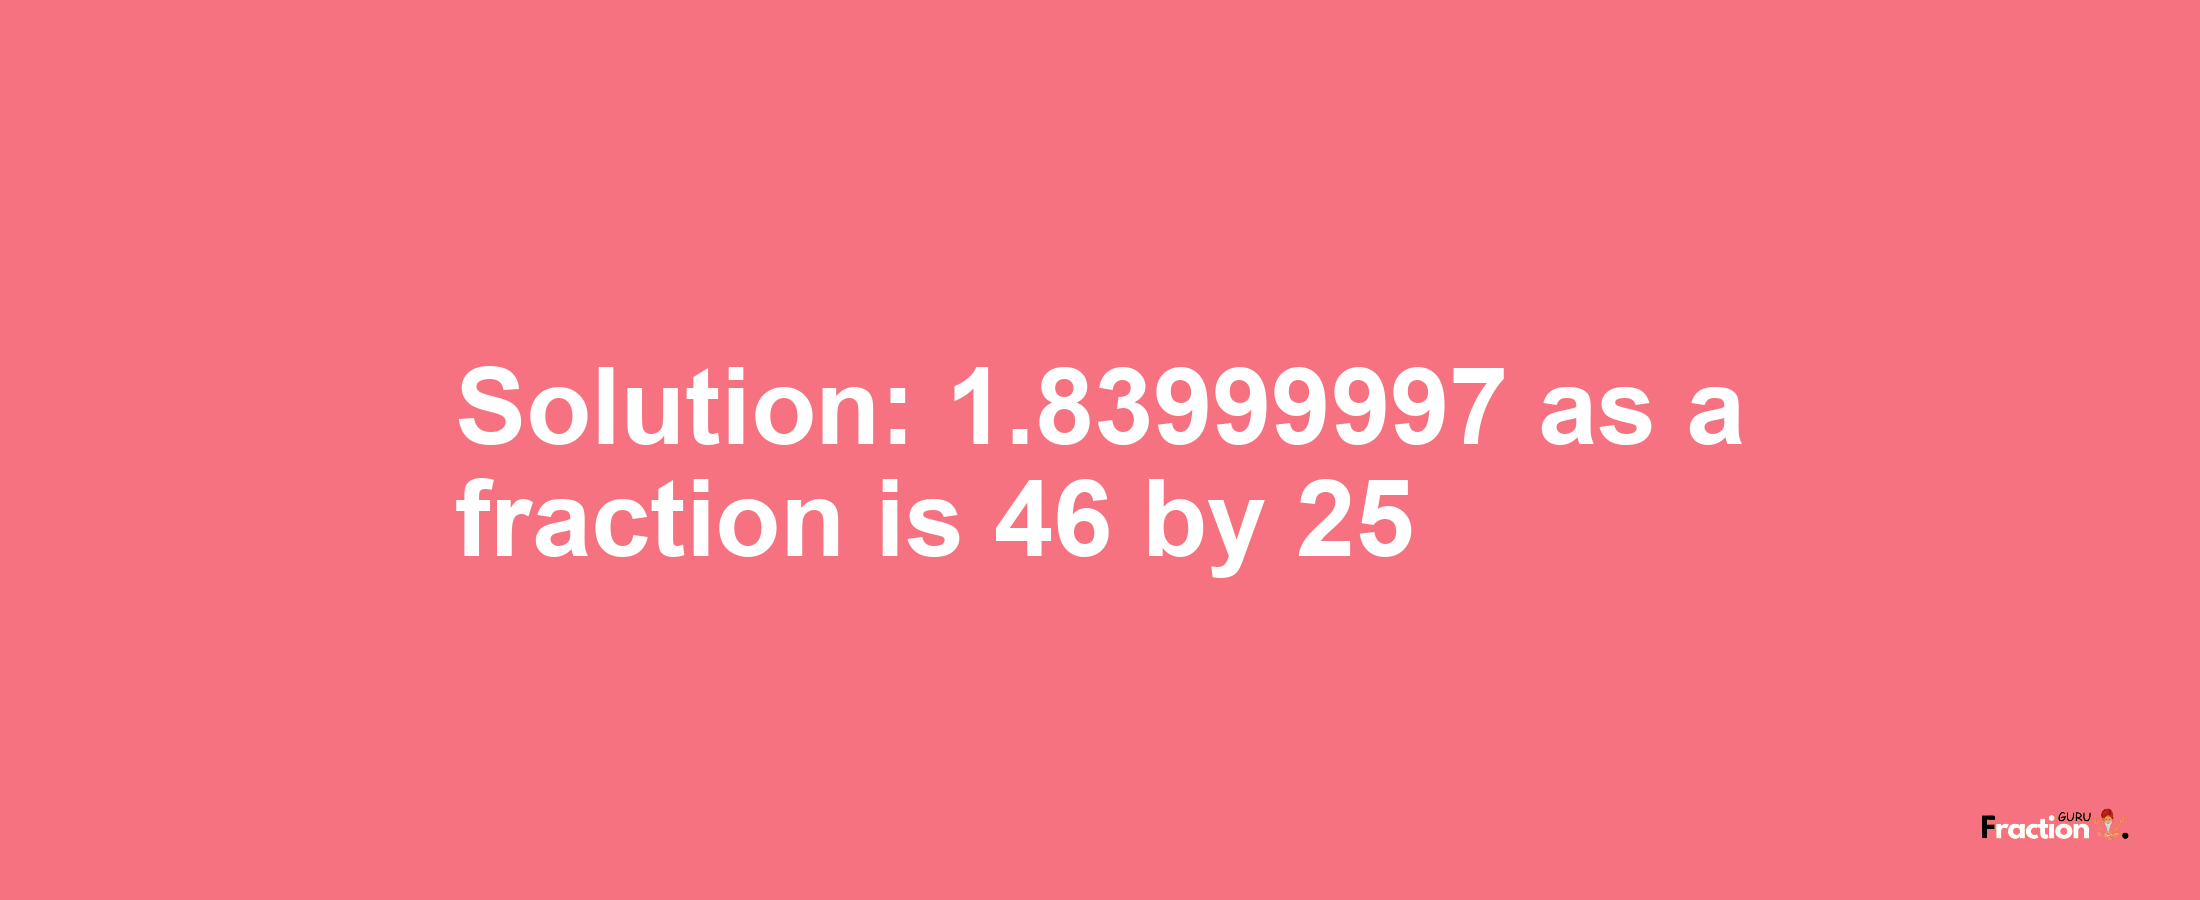 Solution:1.83999997 as a fraction is 46/25